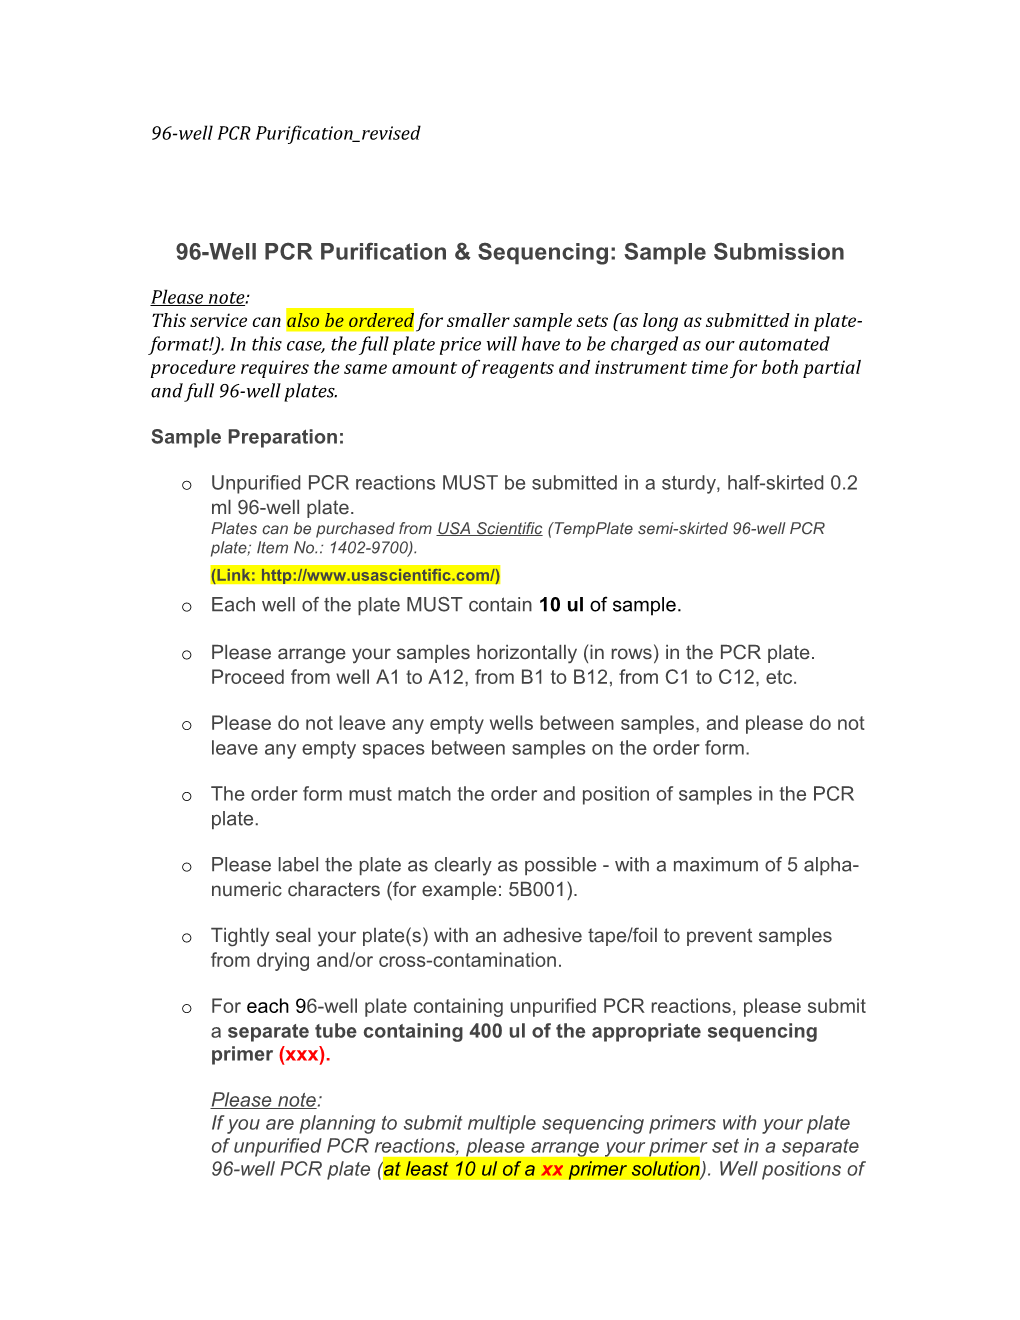 96-Well PCR Purification & Sequencing: Sample Submission